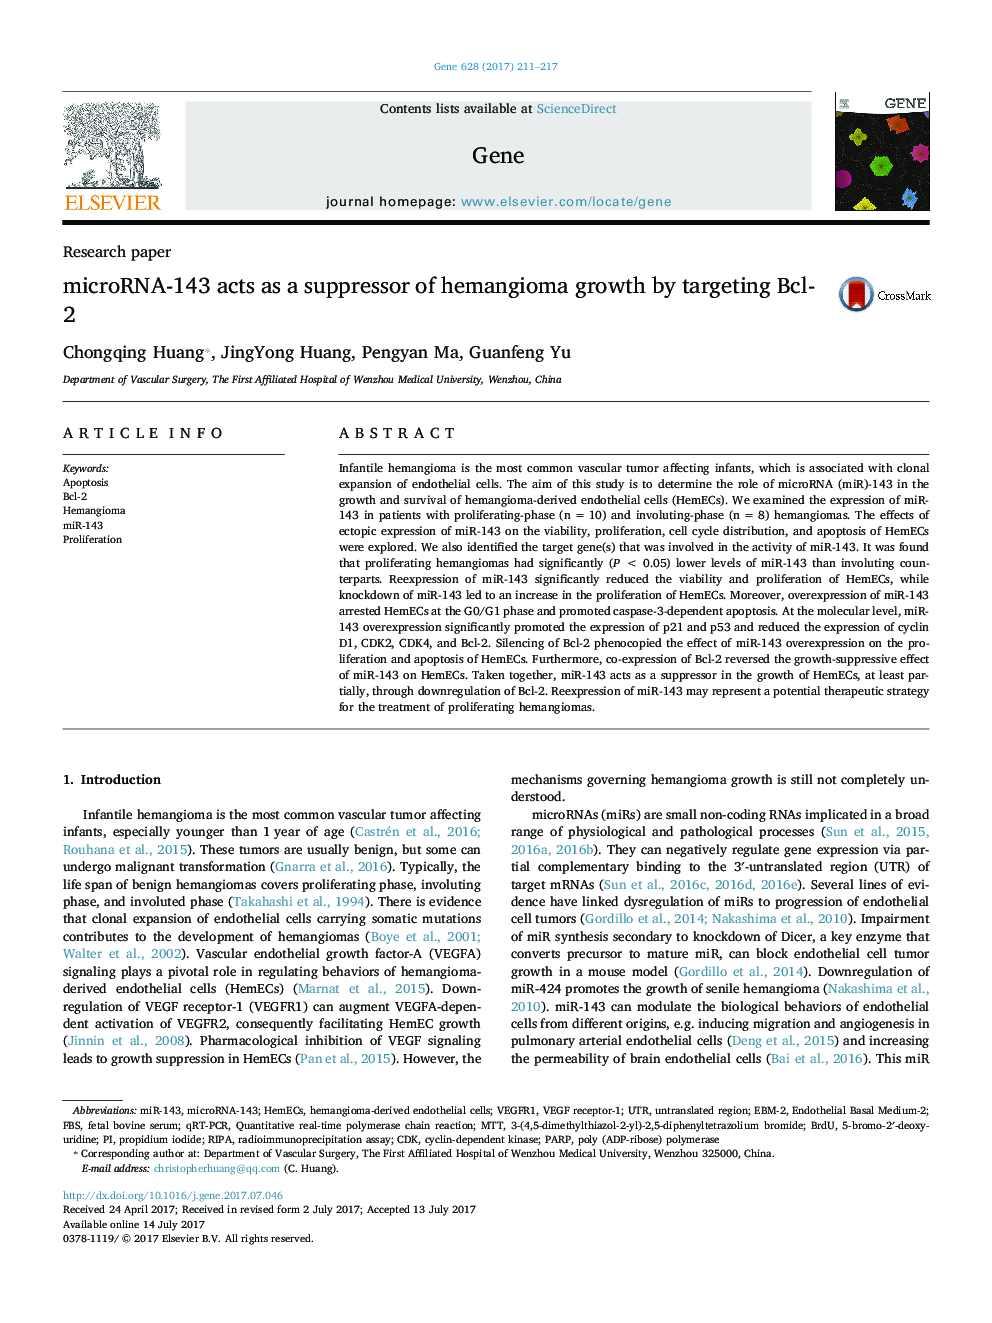 microRNA-143 acts as a suppressor of hemangioma growth by targeting Bcl-2